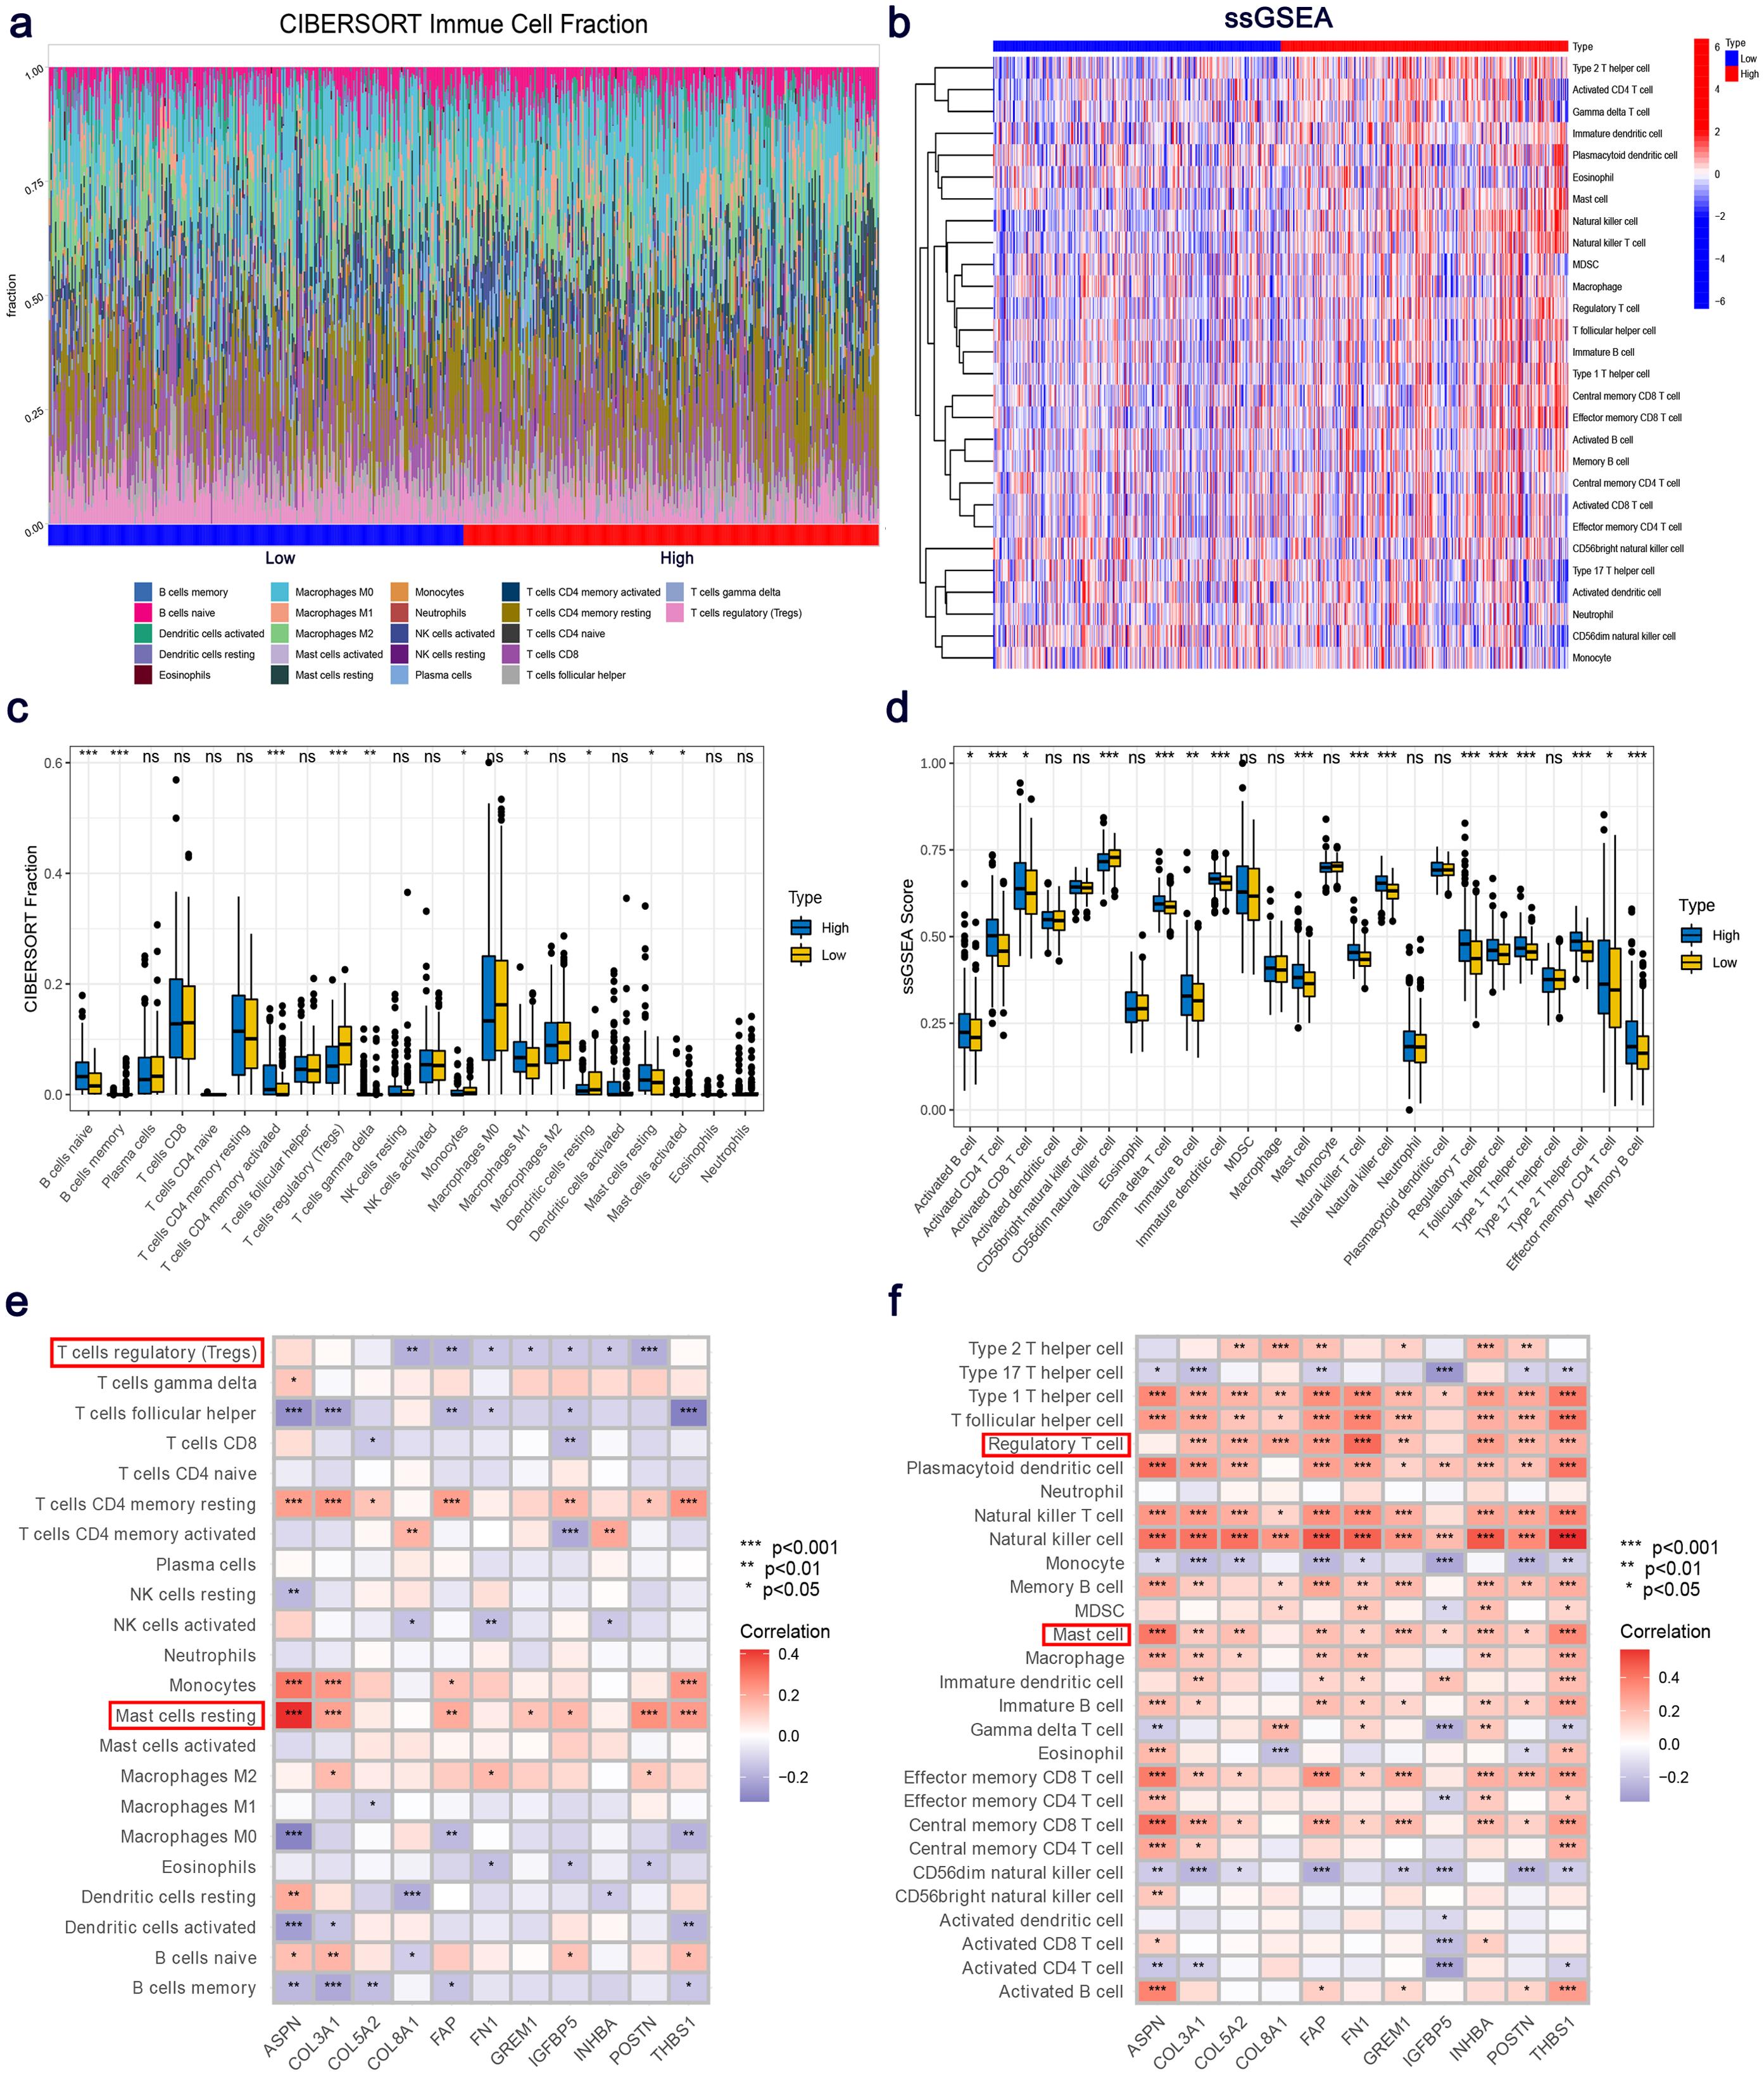 Inference of immune-cell composition on the expression profile through CIBERSORT and ssGSEA algorithms.